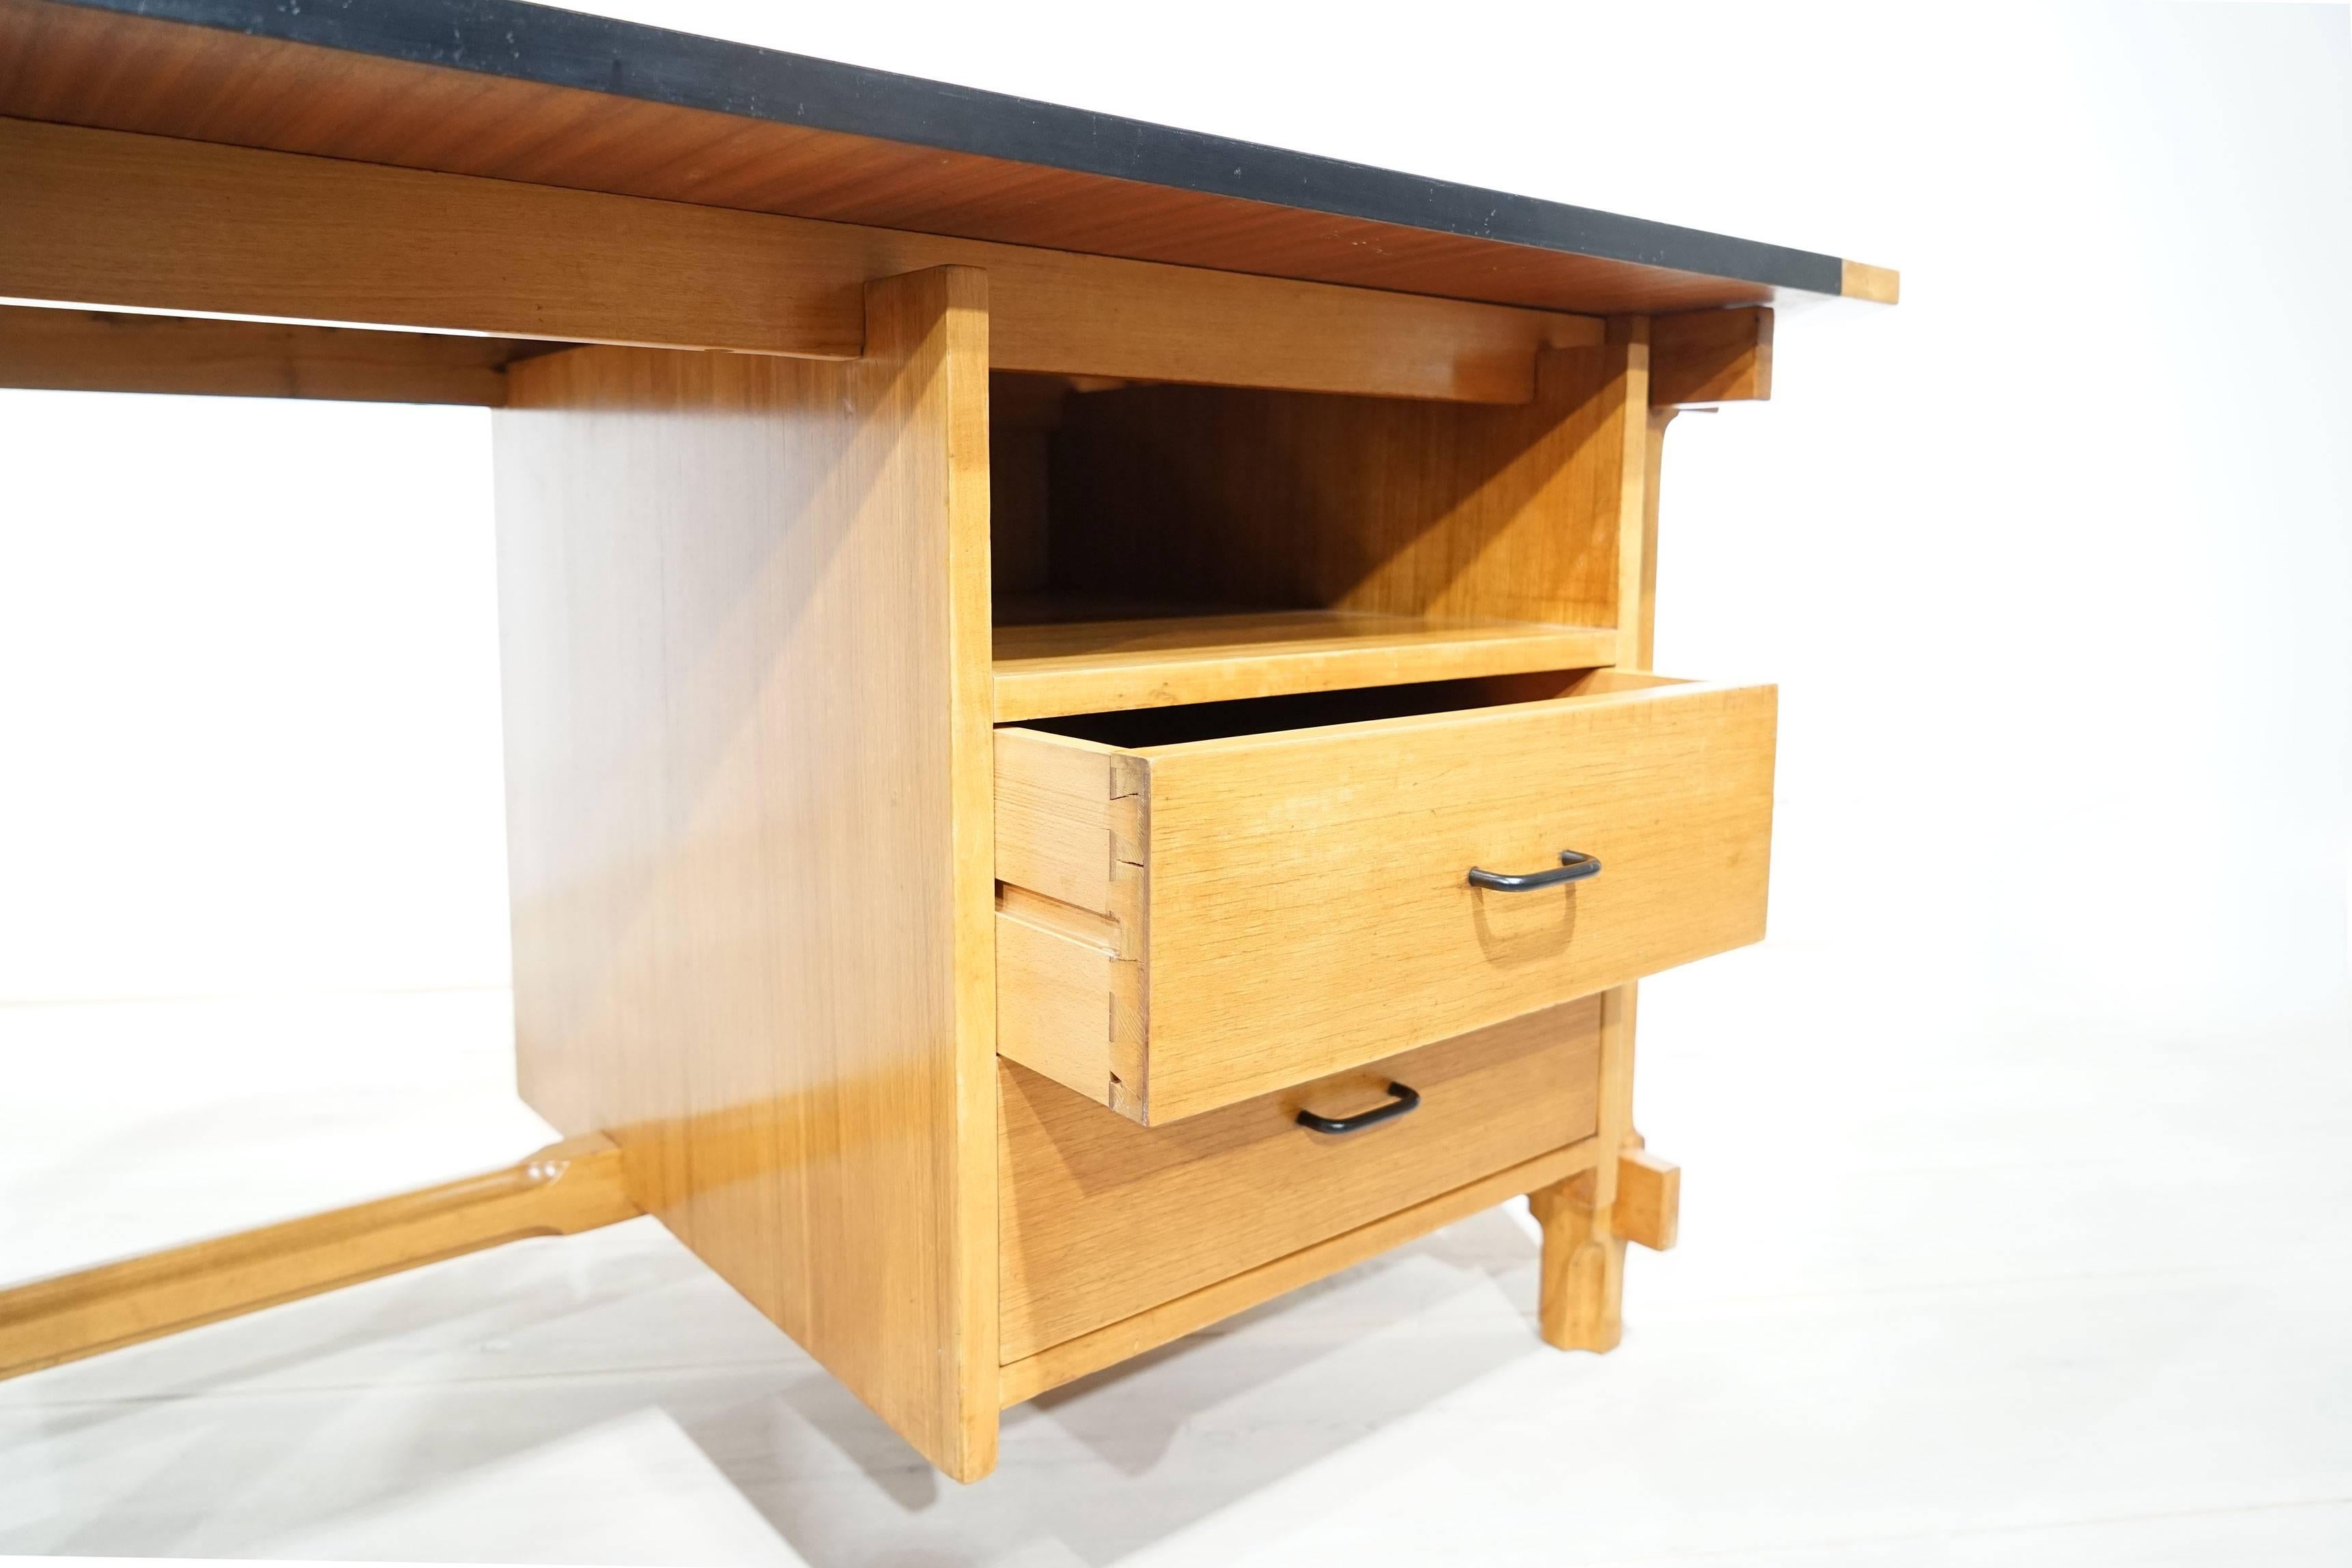 Mid-20th Century Desk by Ico Parisi Manufactured by Fratelli Rizzi, Cantù 1959